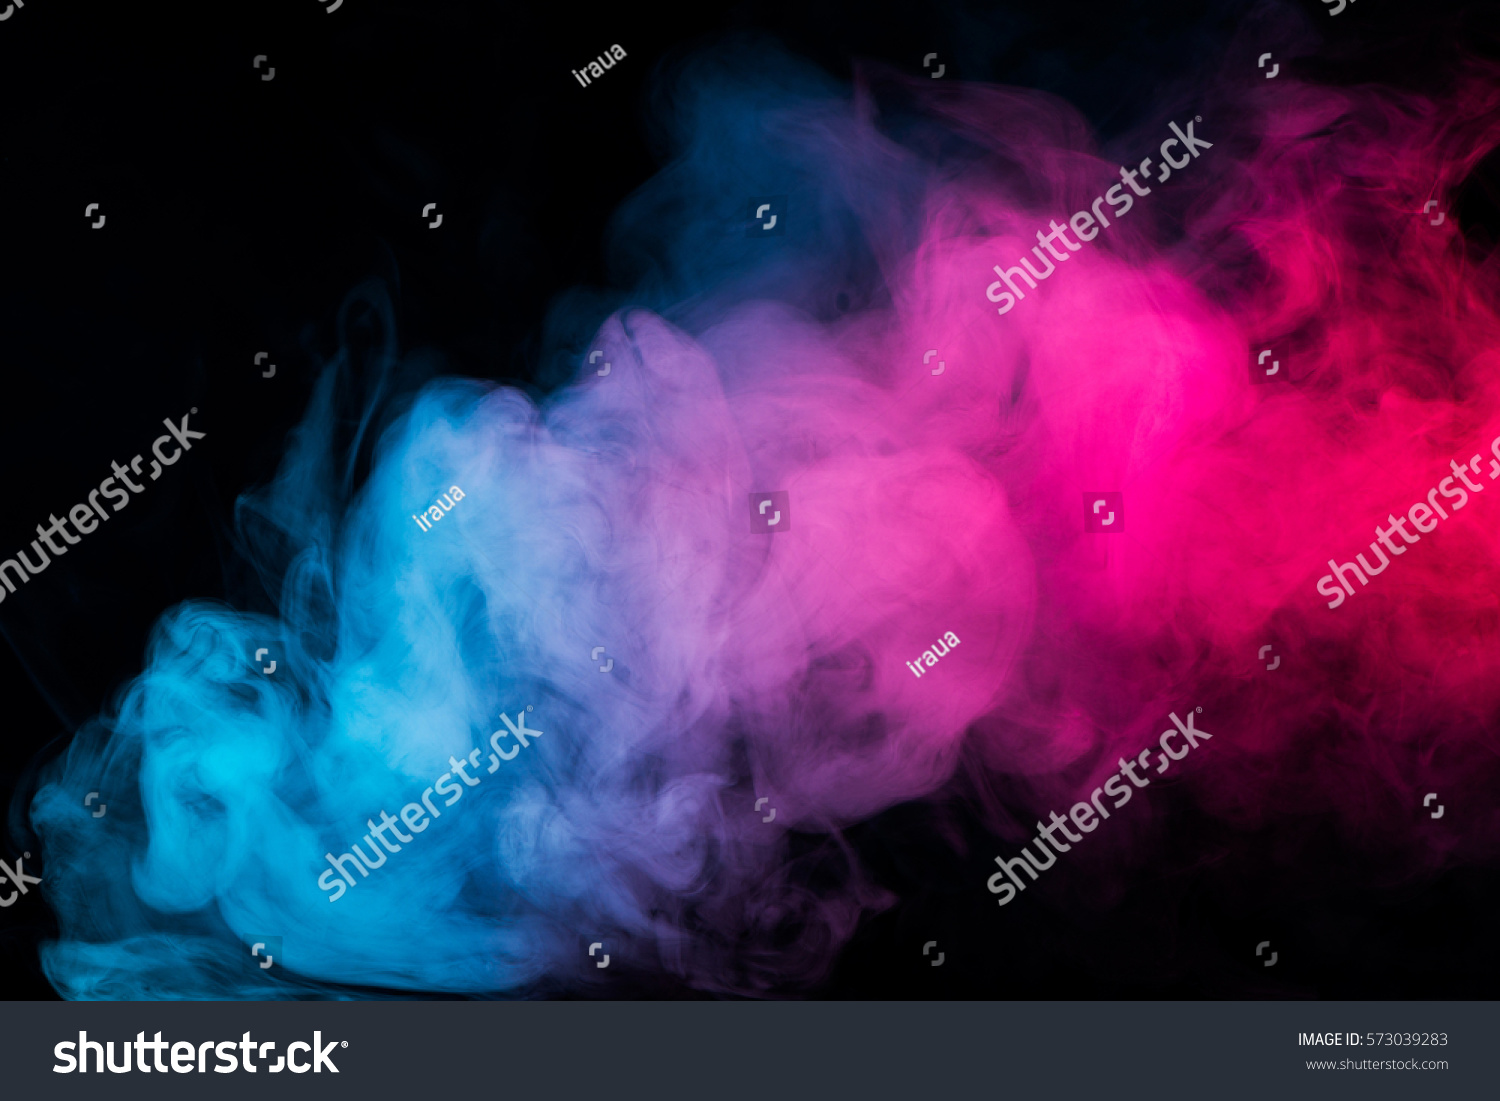 Edit Pictures Free Online - colorful smoke | Shutterstock Editor